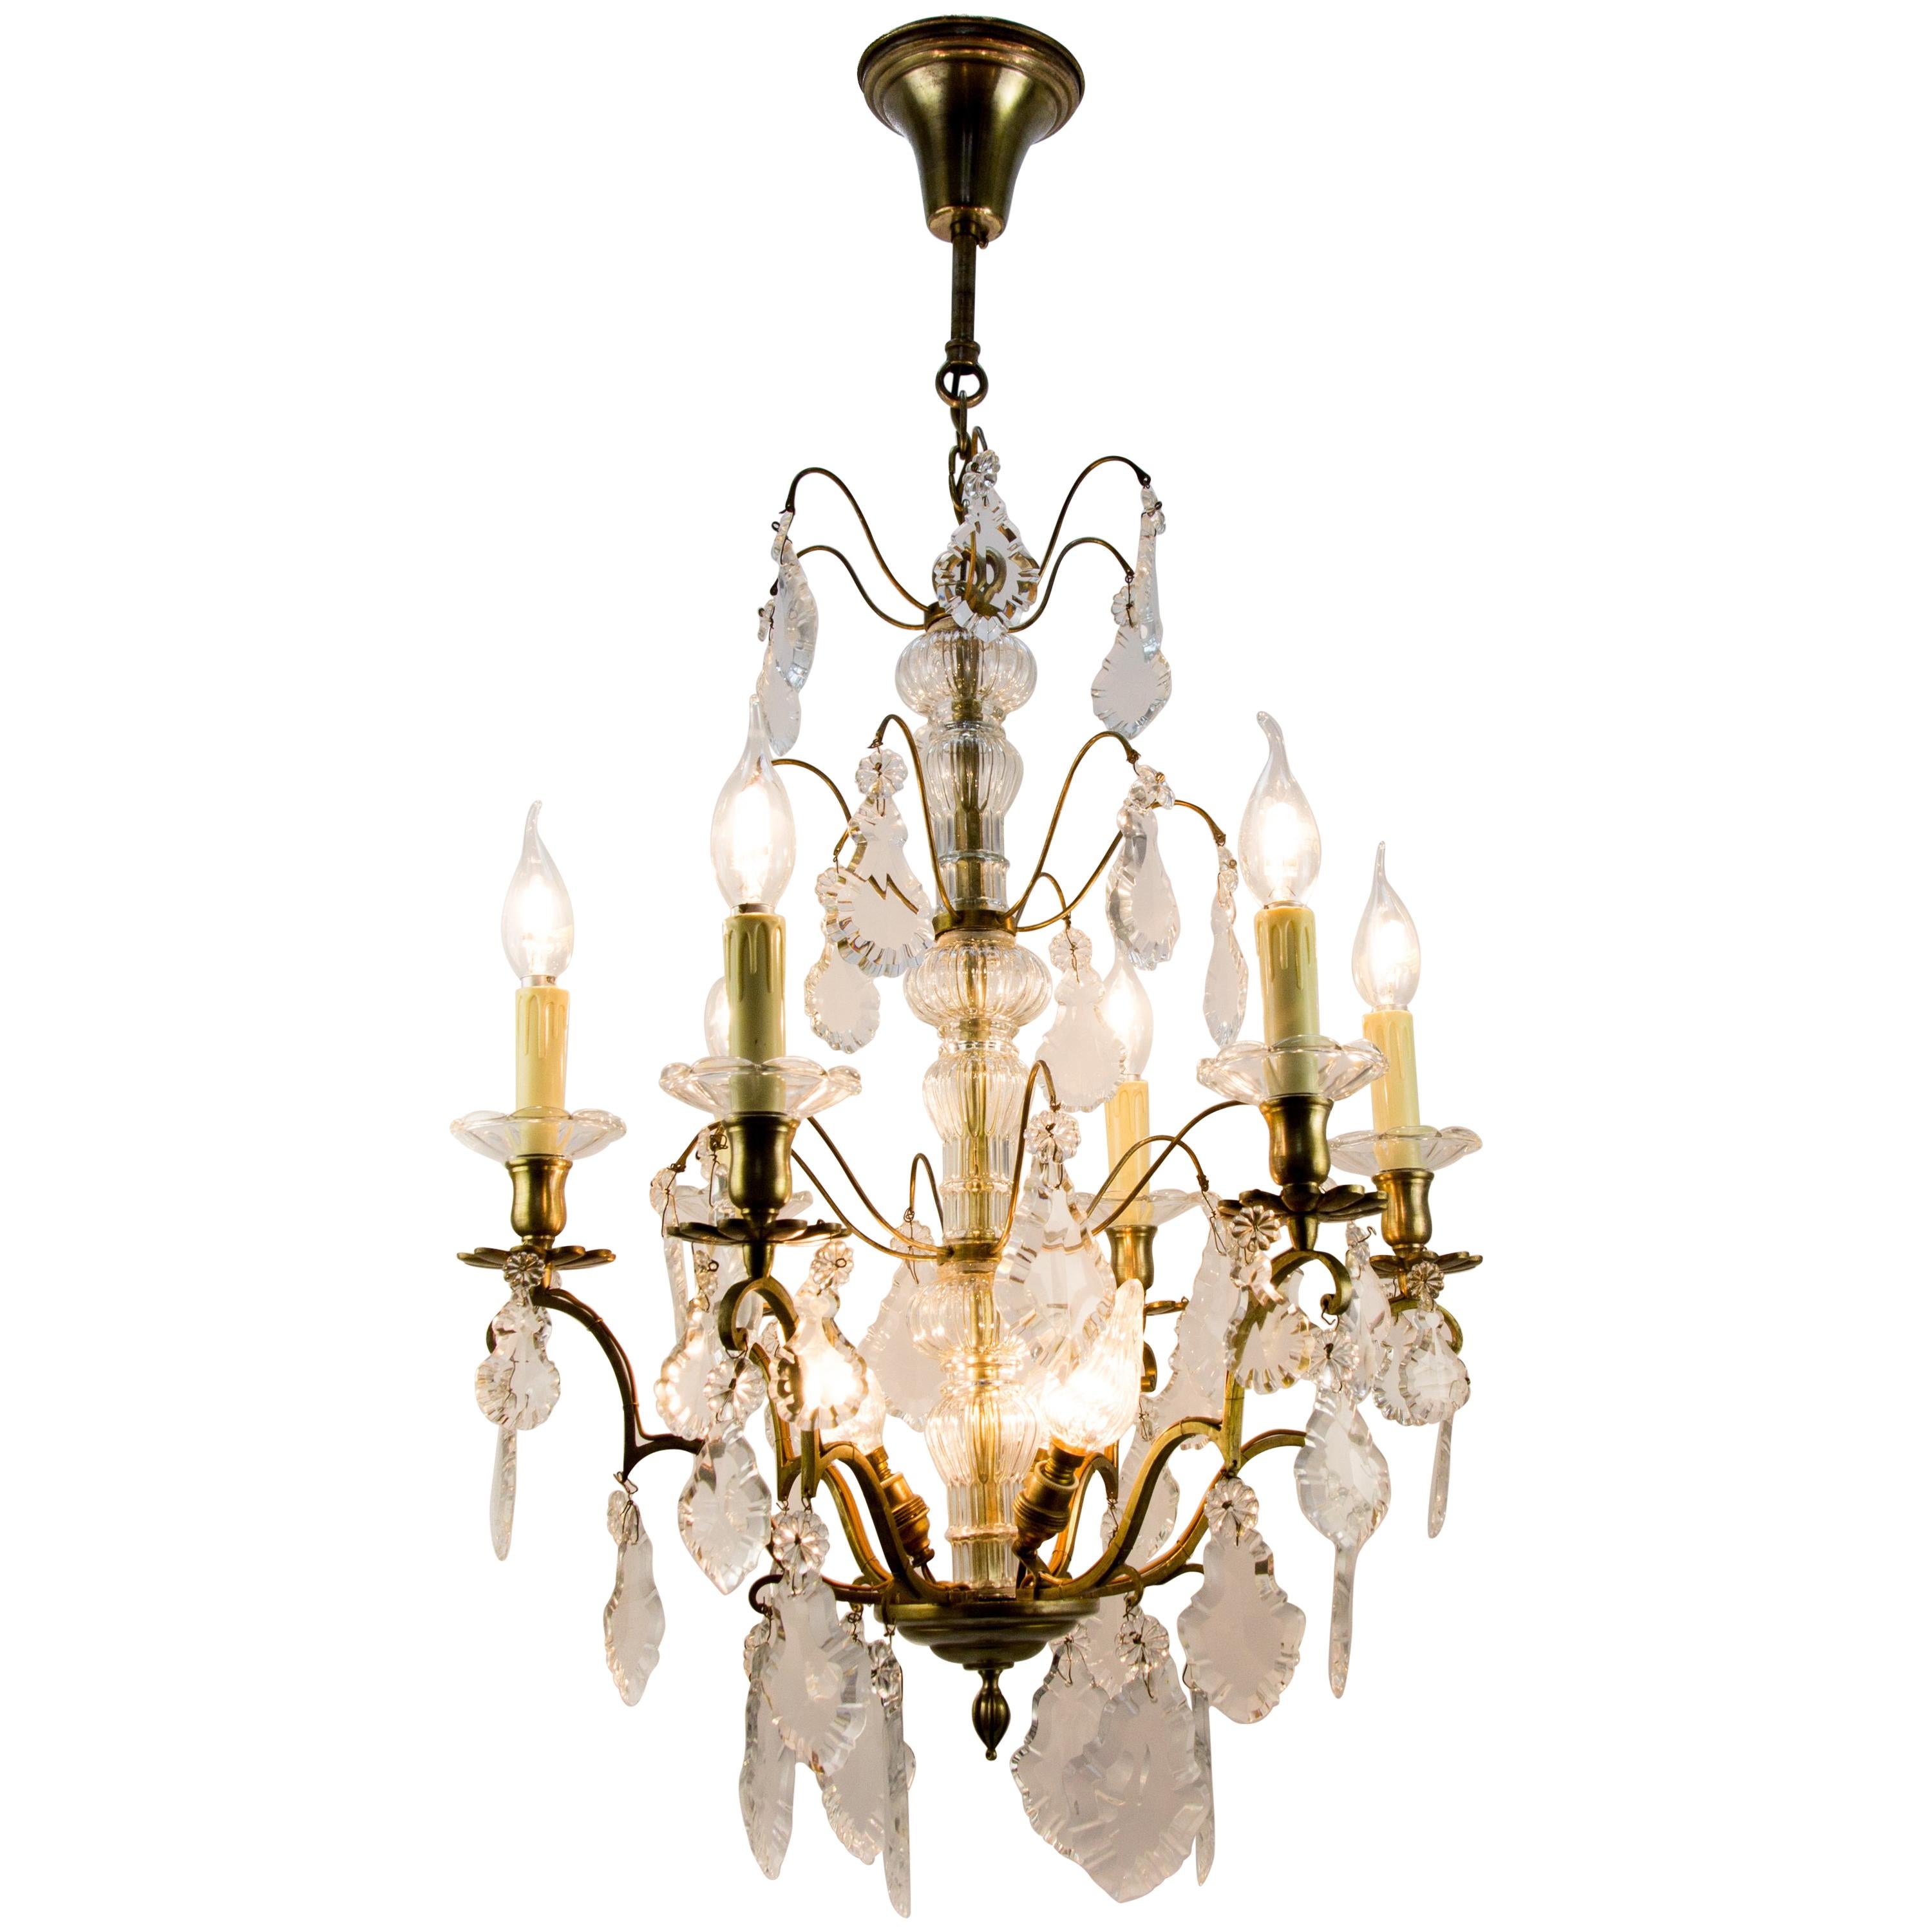 19th Century French Nine–Light Brass and Crystal Chandelier